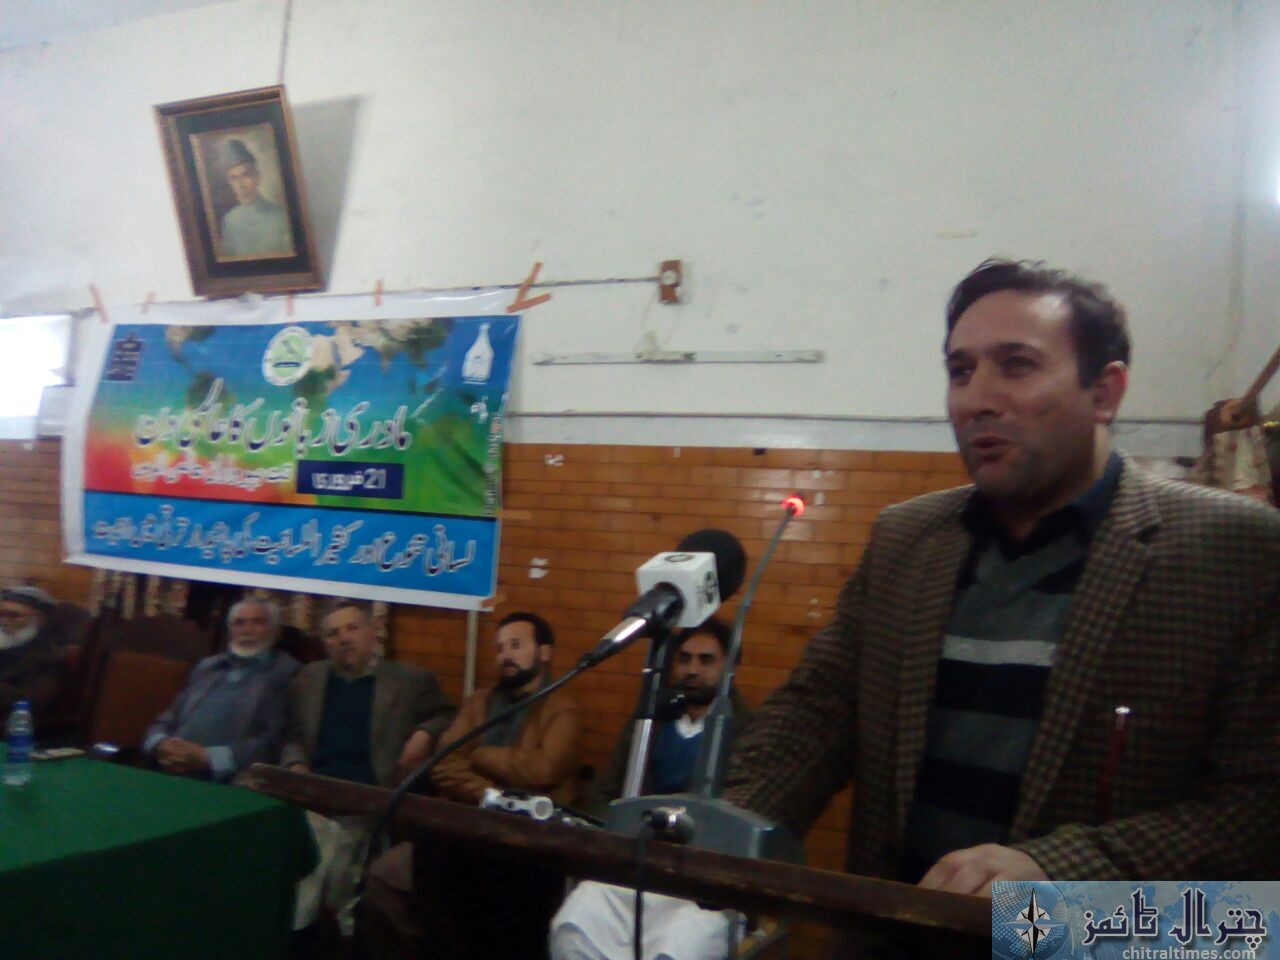 international languages day celebrated in Chitral 3